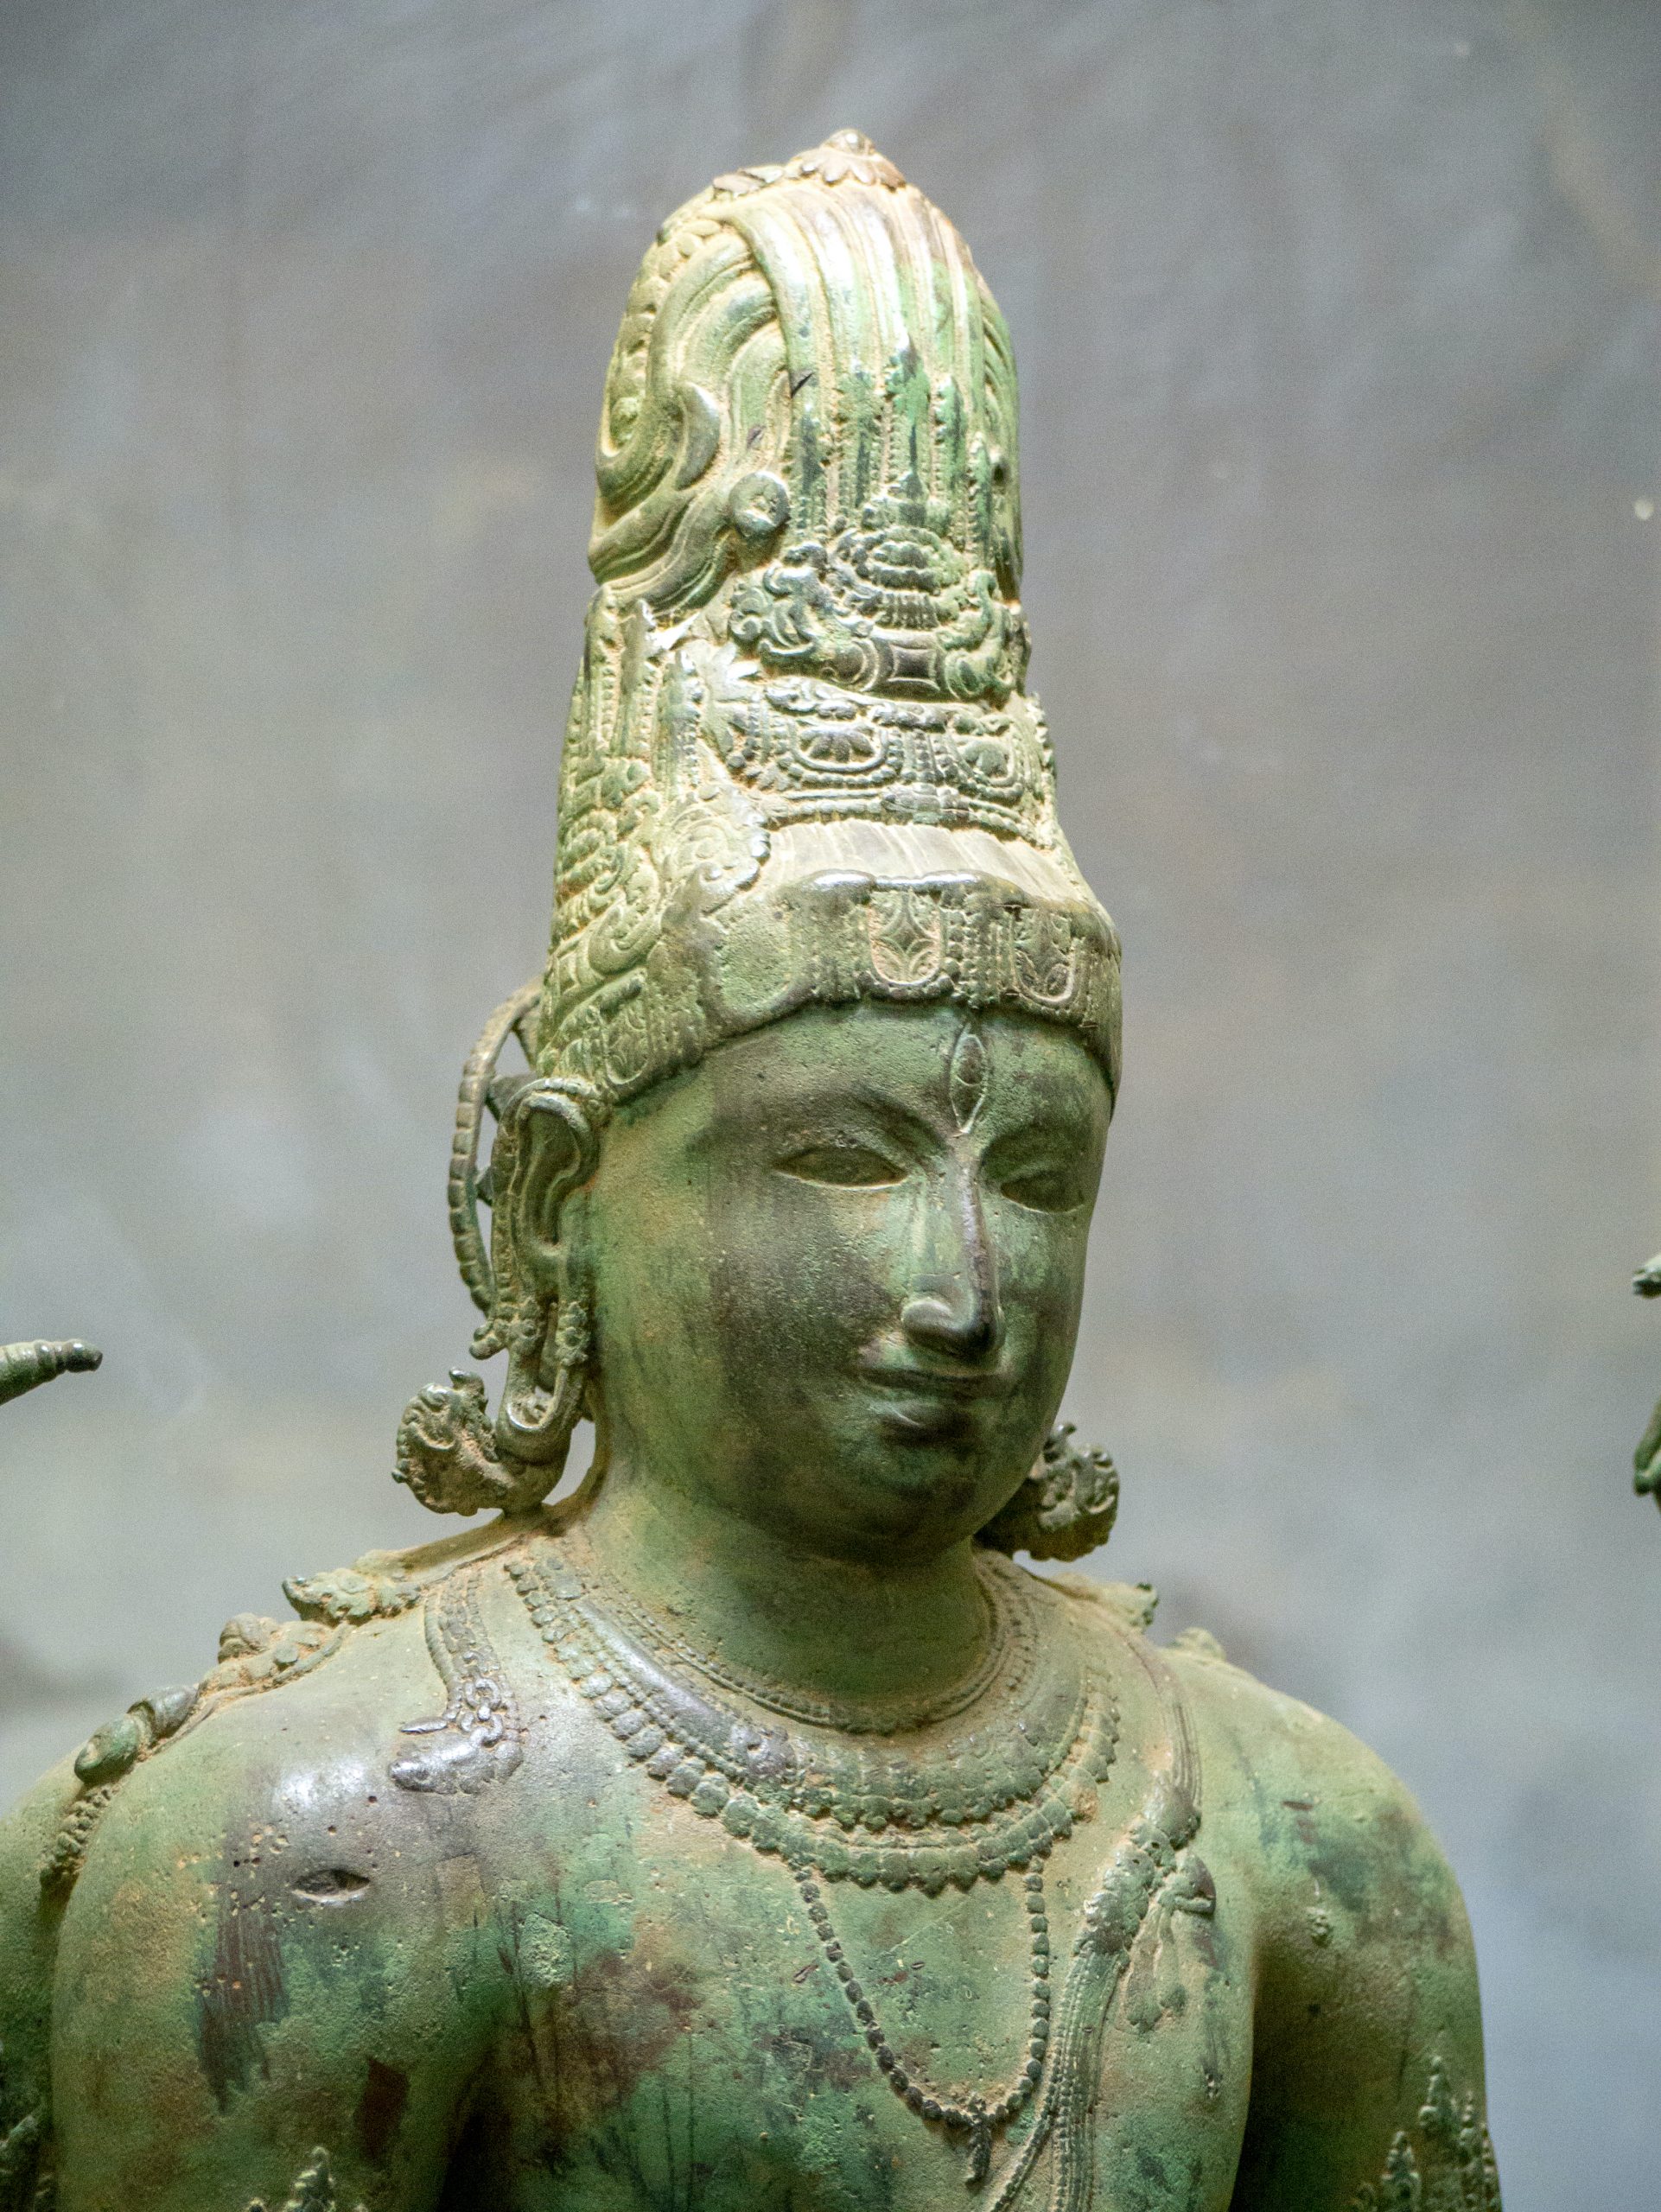 Bronze sculpture wearing several ornaments. Has oxidised to a green colour with patches of bronze seen on the head and chest of the sculpture.